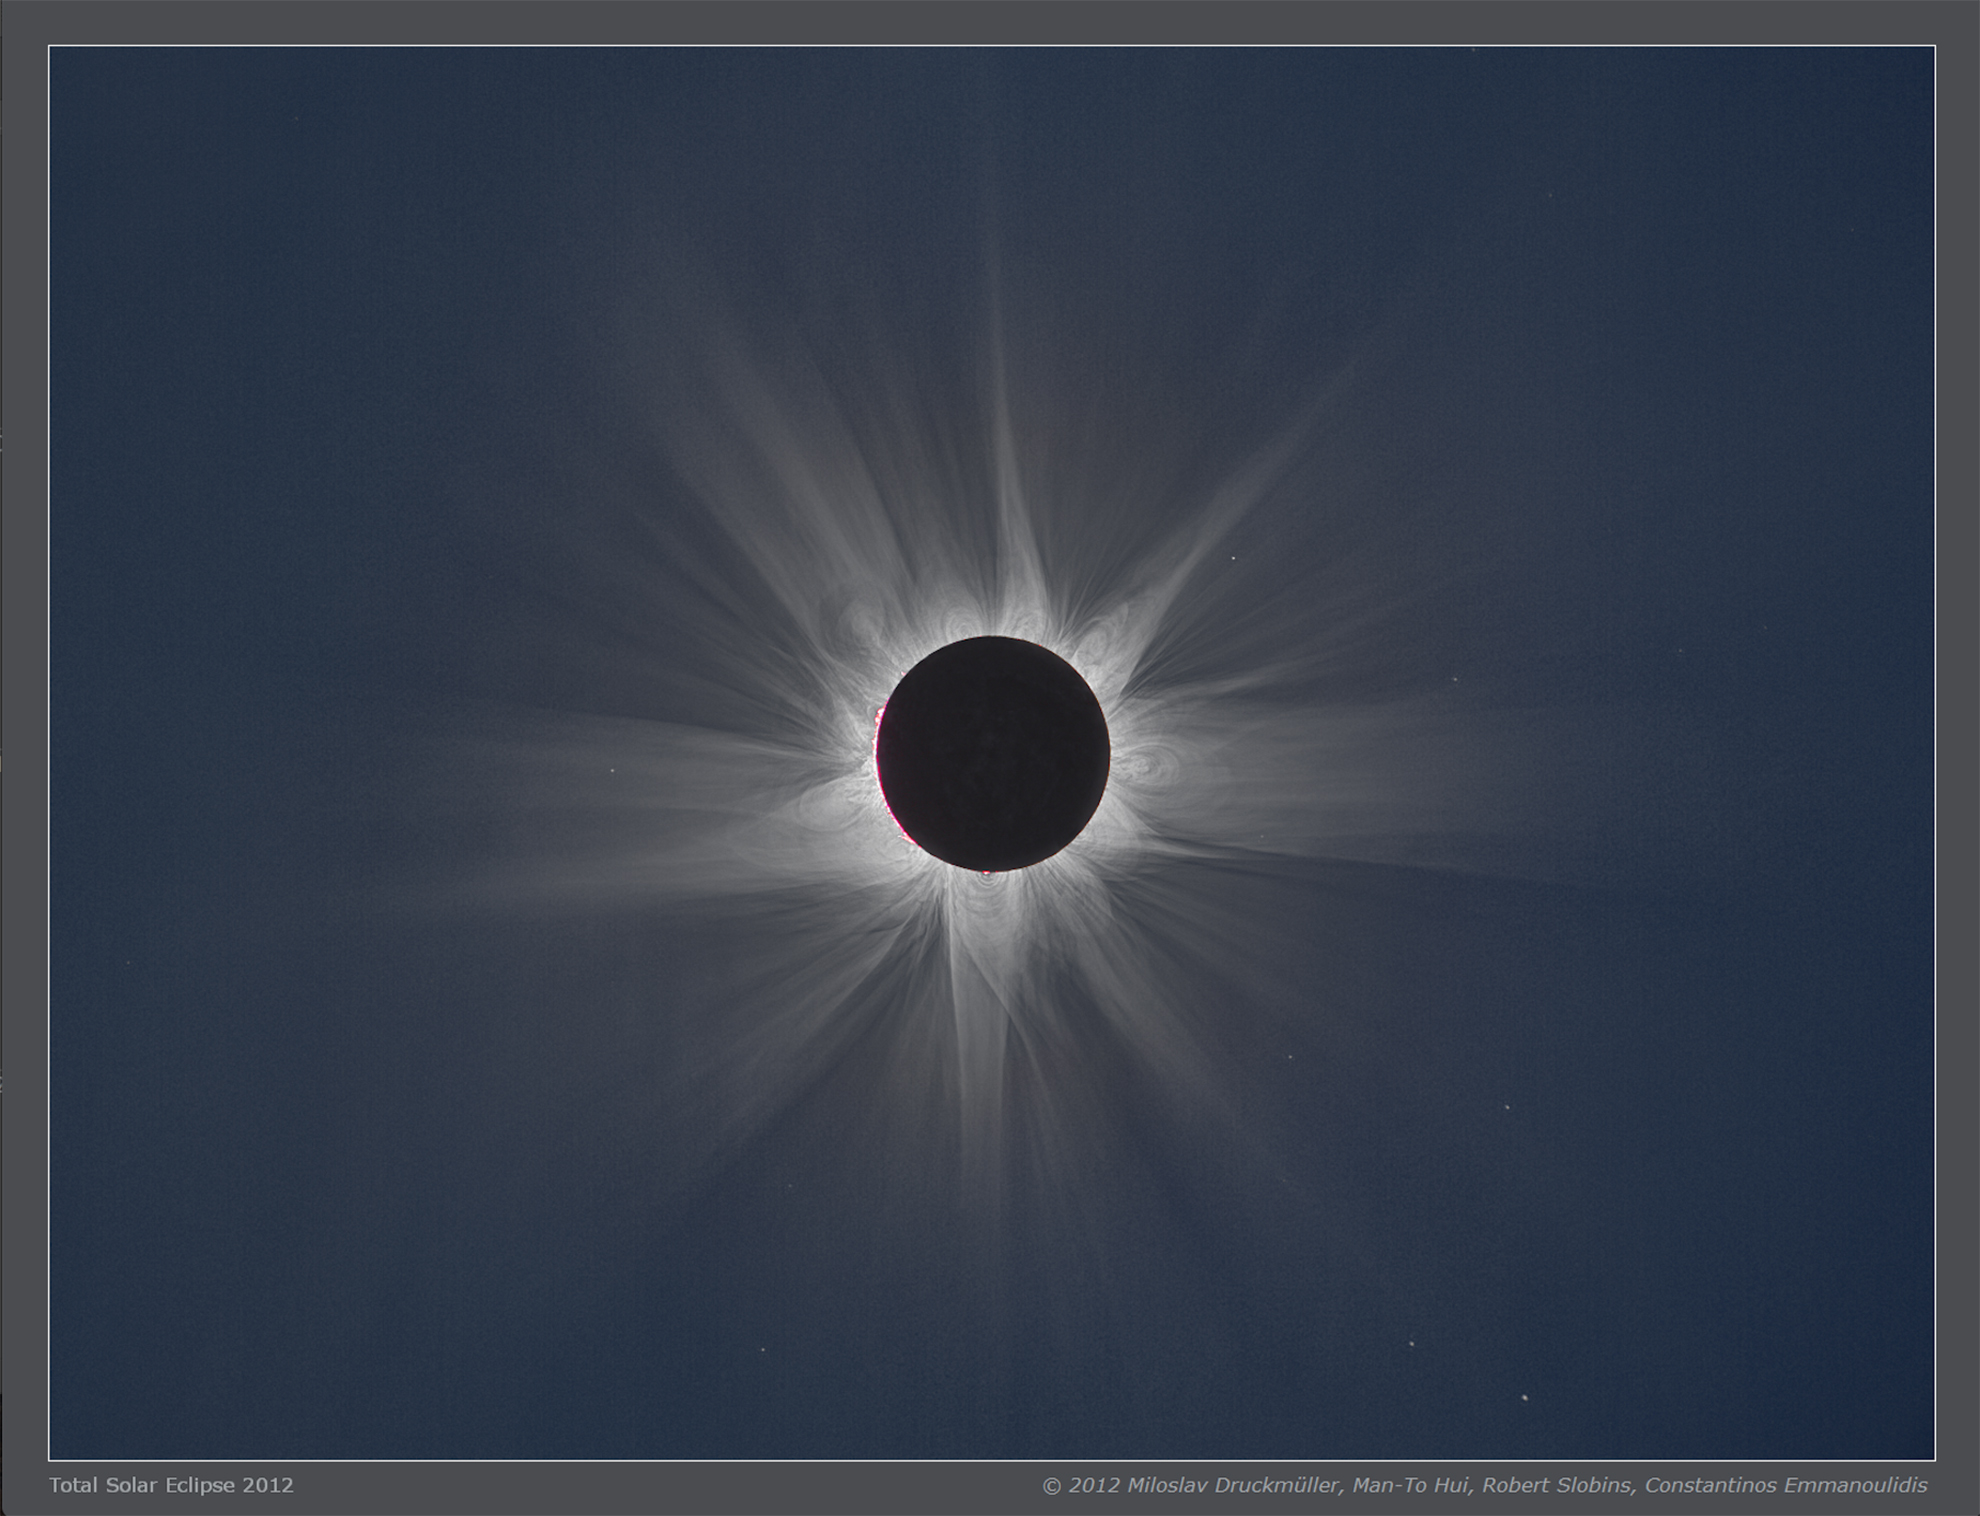 The sun's Corona during the totality phase of eclipse